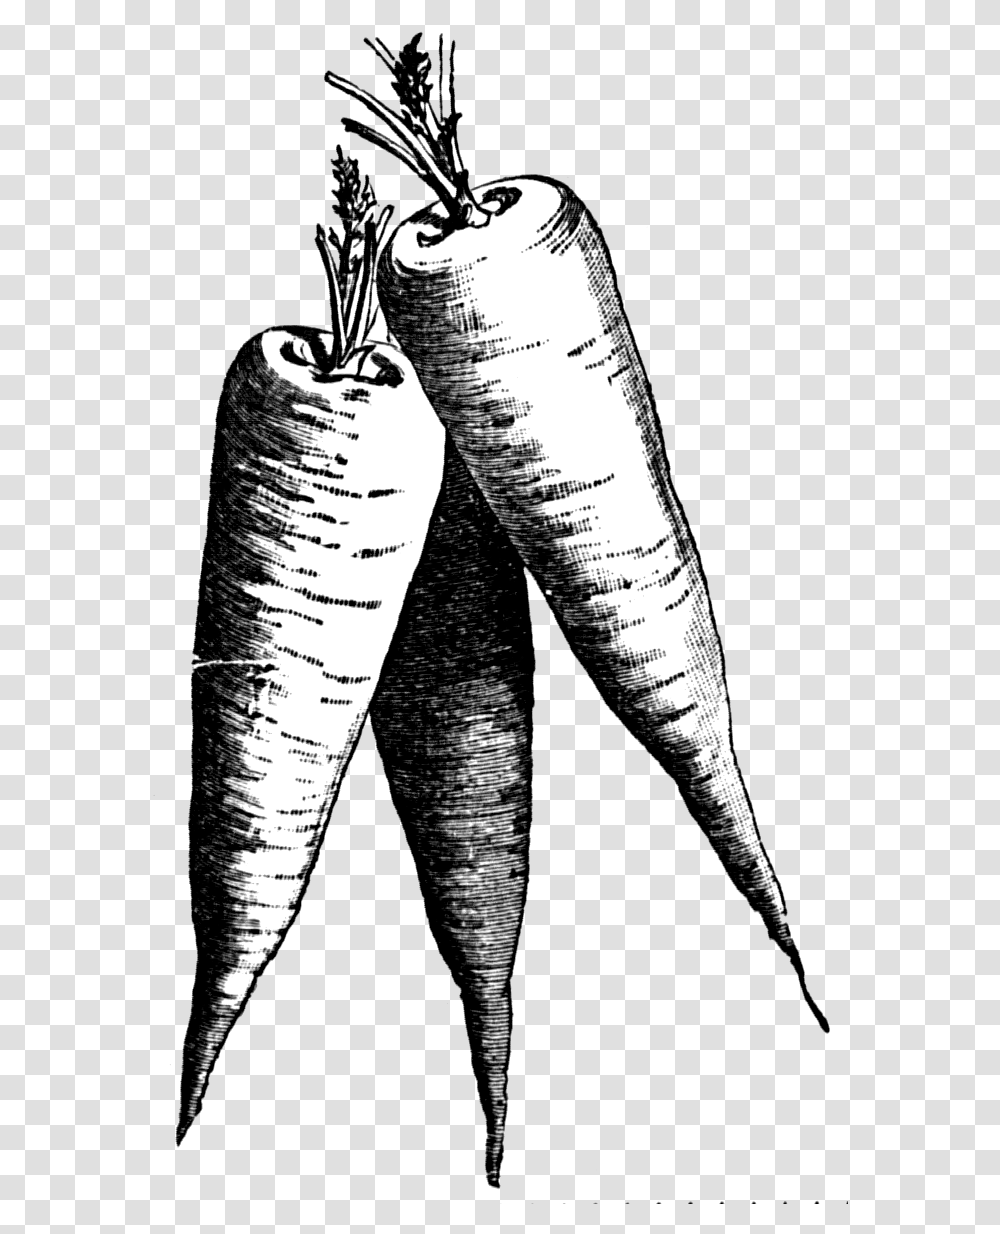 Carrot Black And White Clip Art Carrot Black And White, Plant, Produce, Food, Vegetable Transparent Png